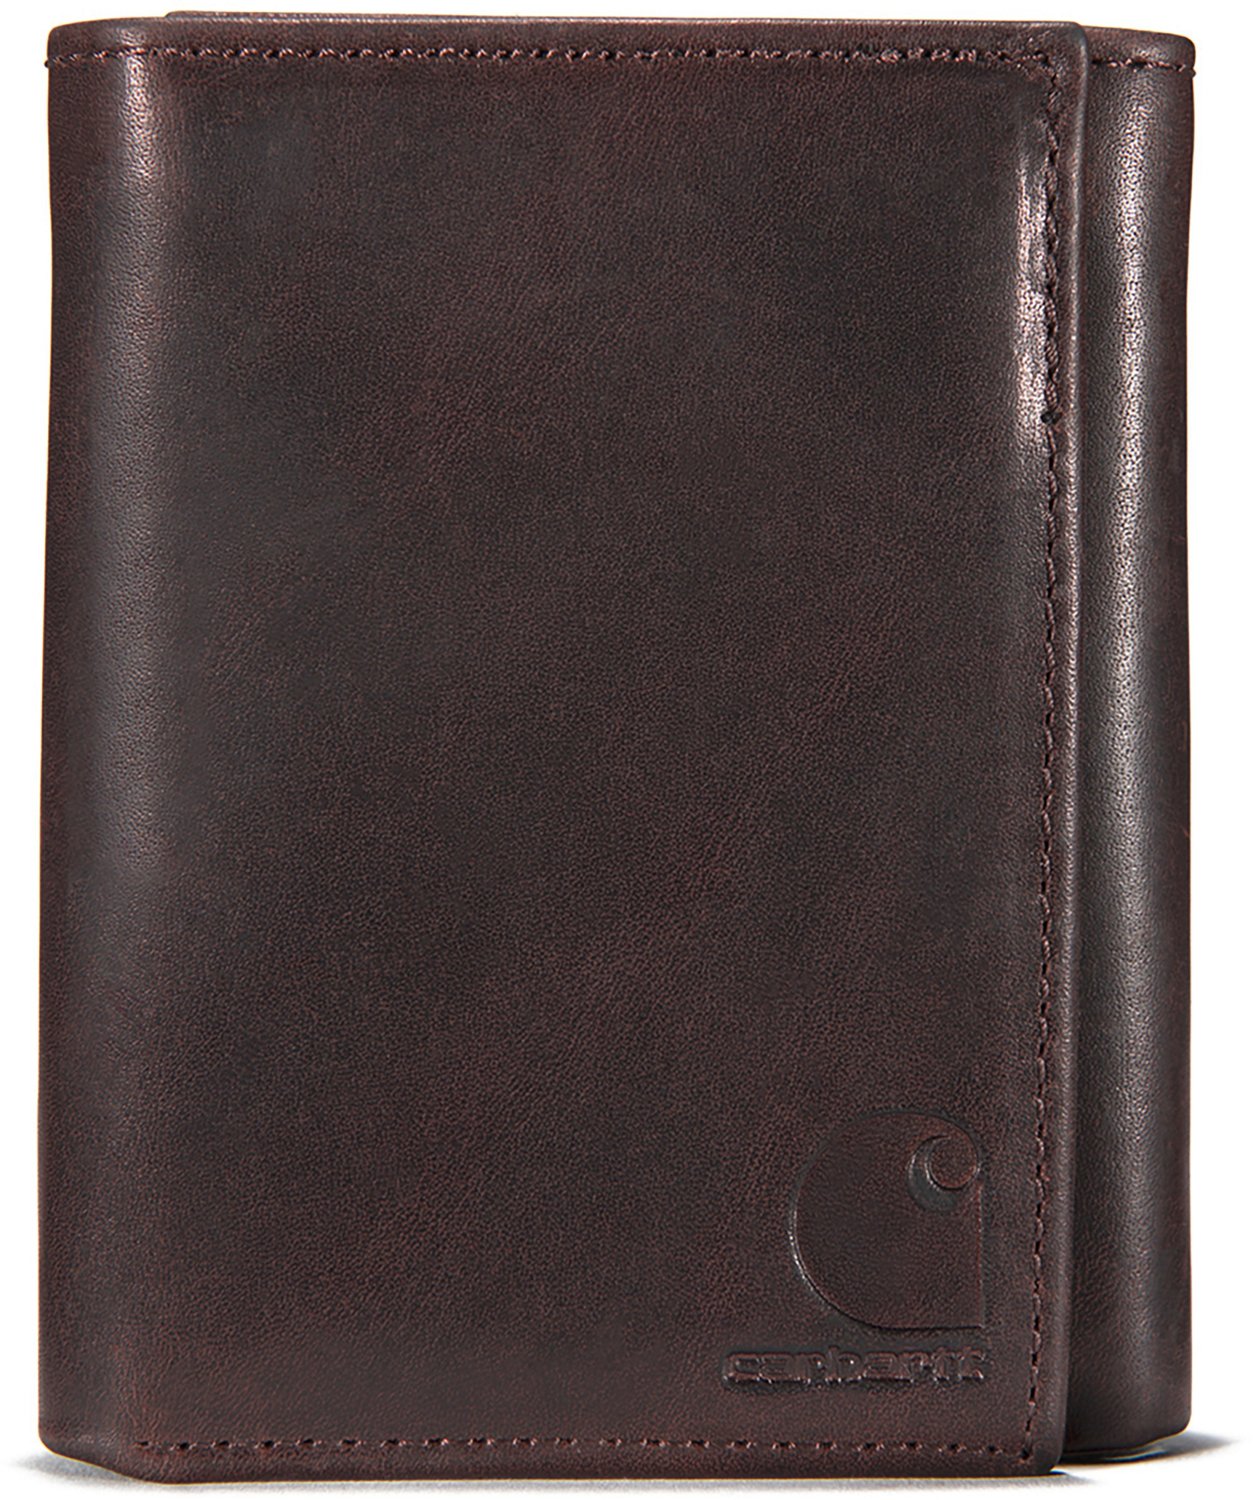 Carhartt Oil Tan Trifold Wallet                                                                                                  - view number 1 selected